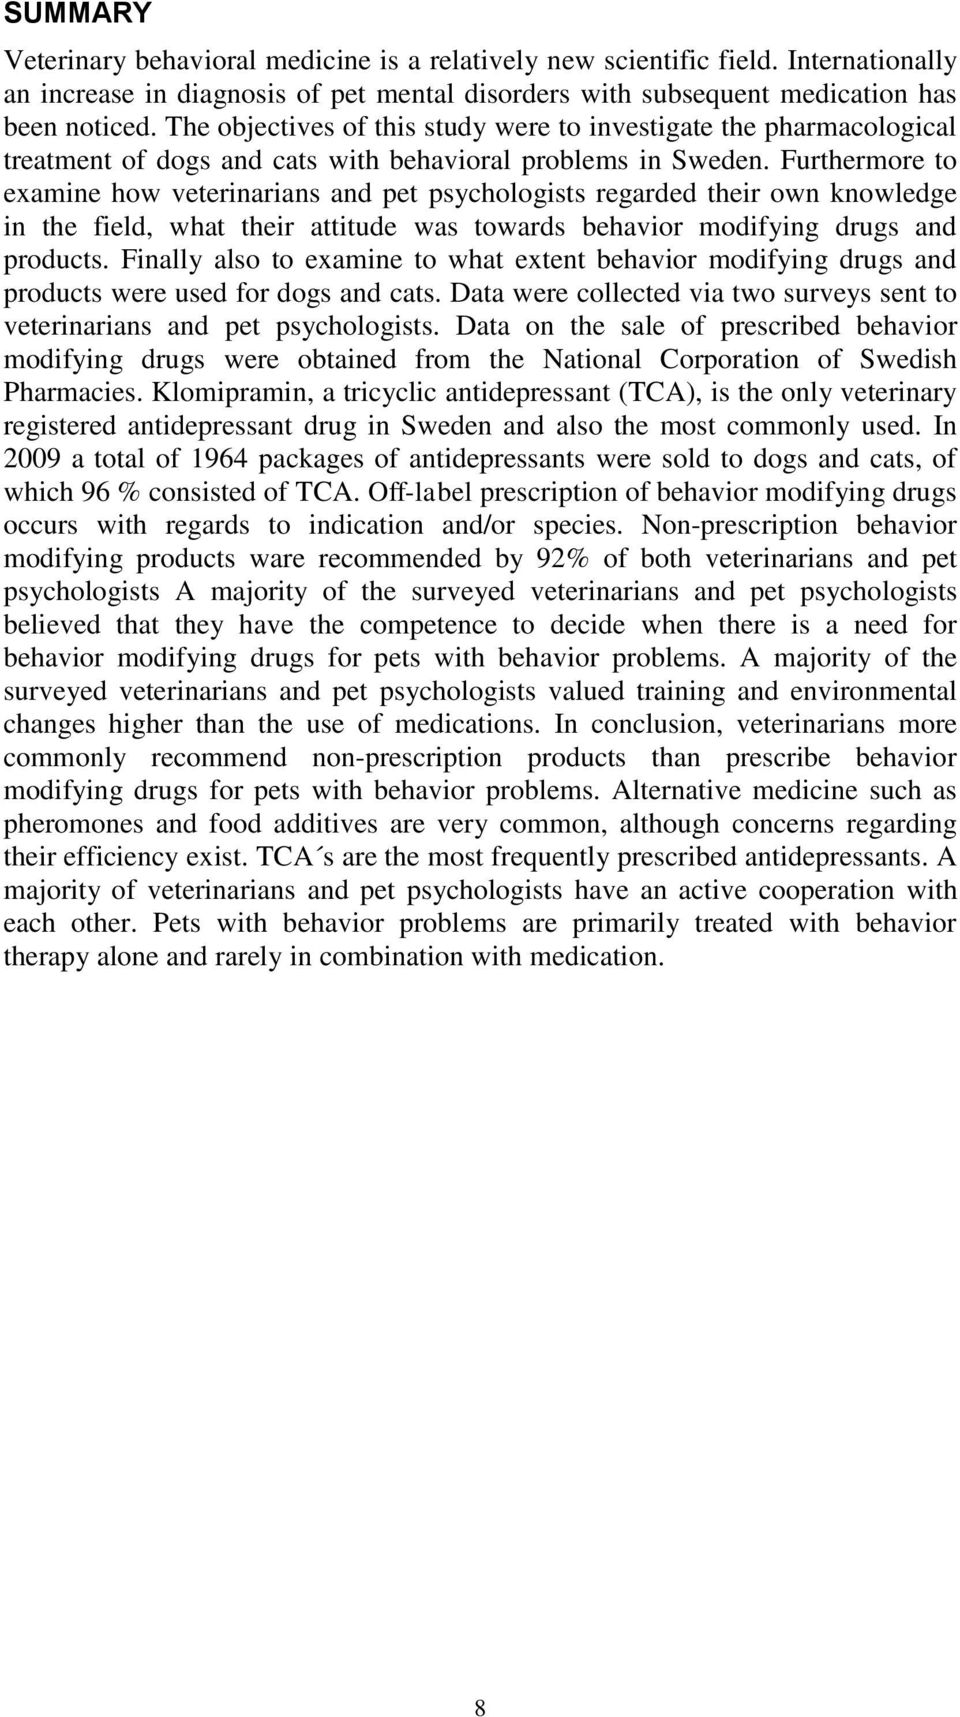 Furthermore to examine how veterinarians and pet psychologists regarded their own knowledge in the field, what their attitude was towards behavior modifying drugs and products.